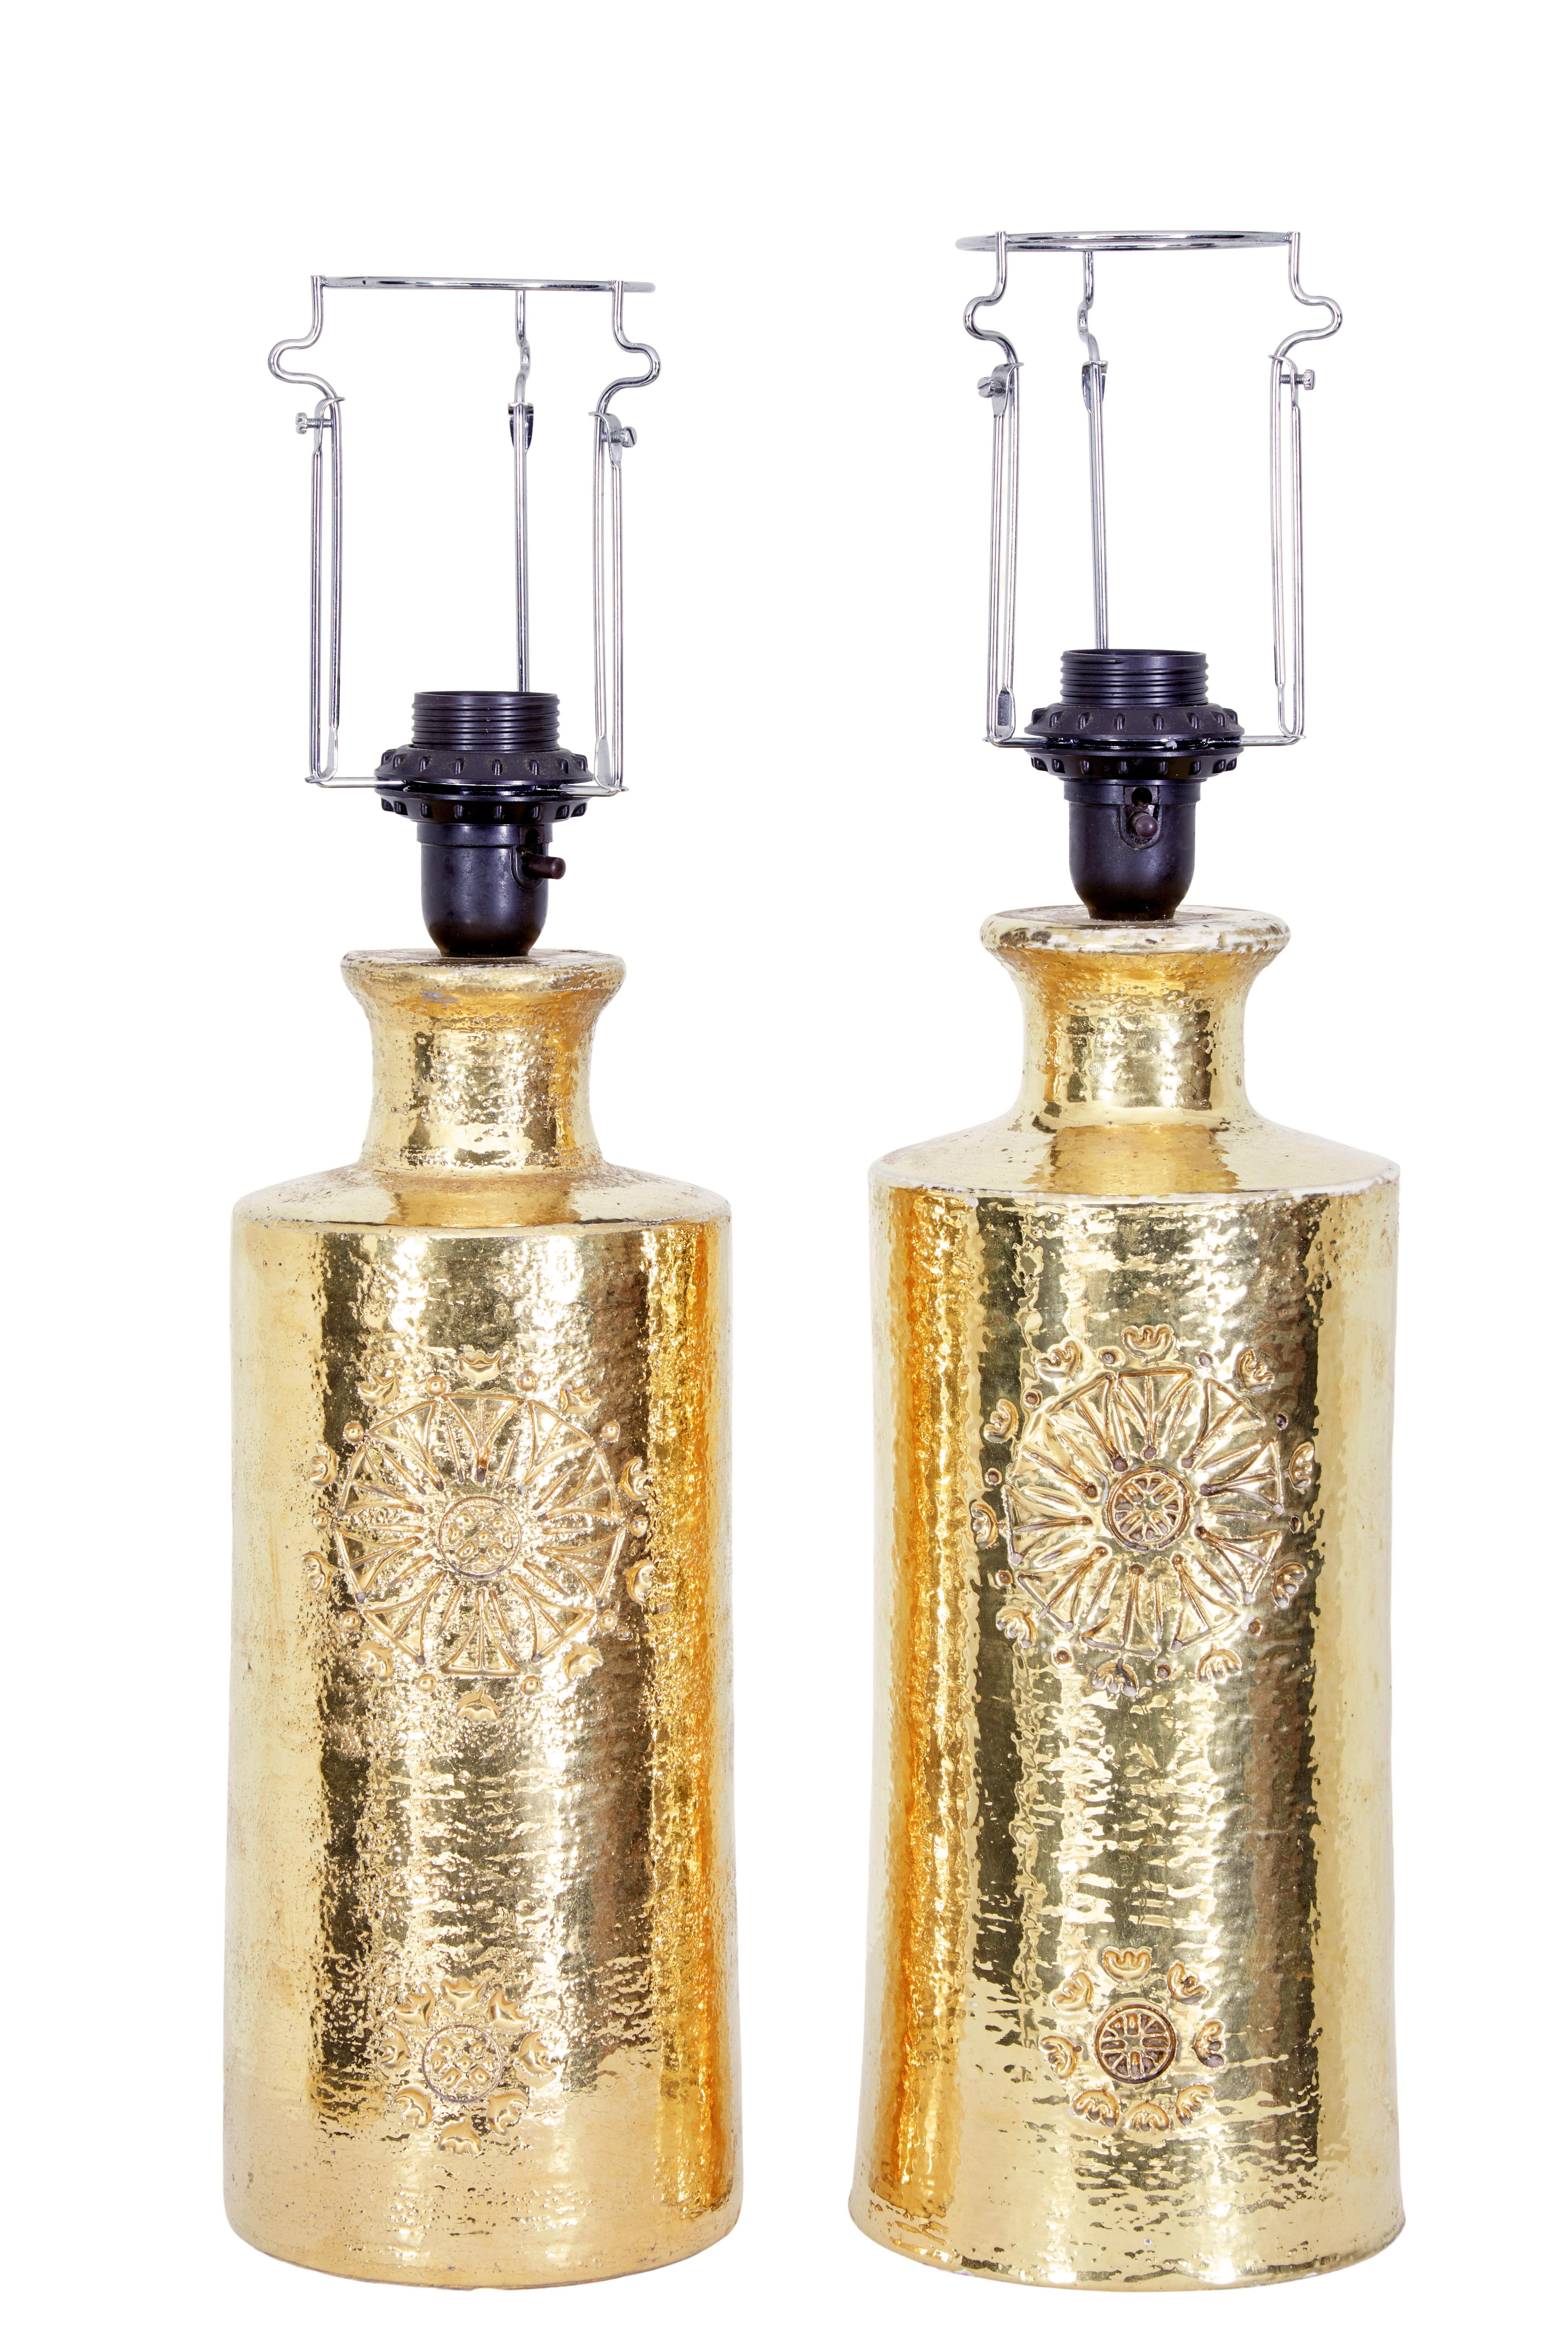 Near pair of mid century Bittosi gilt lamps for Bergboms circa 1970.

Table lamps designed by Bitossi ceramics for well known retailer Bergboms.  This is a very near pair, of the same design and finish with slight variations in dimensions.

Made of